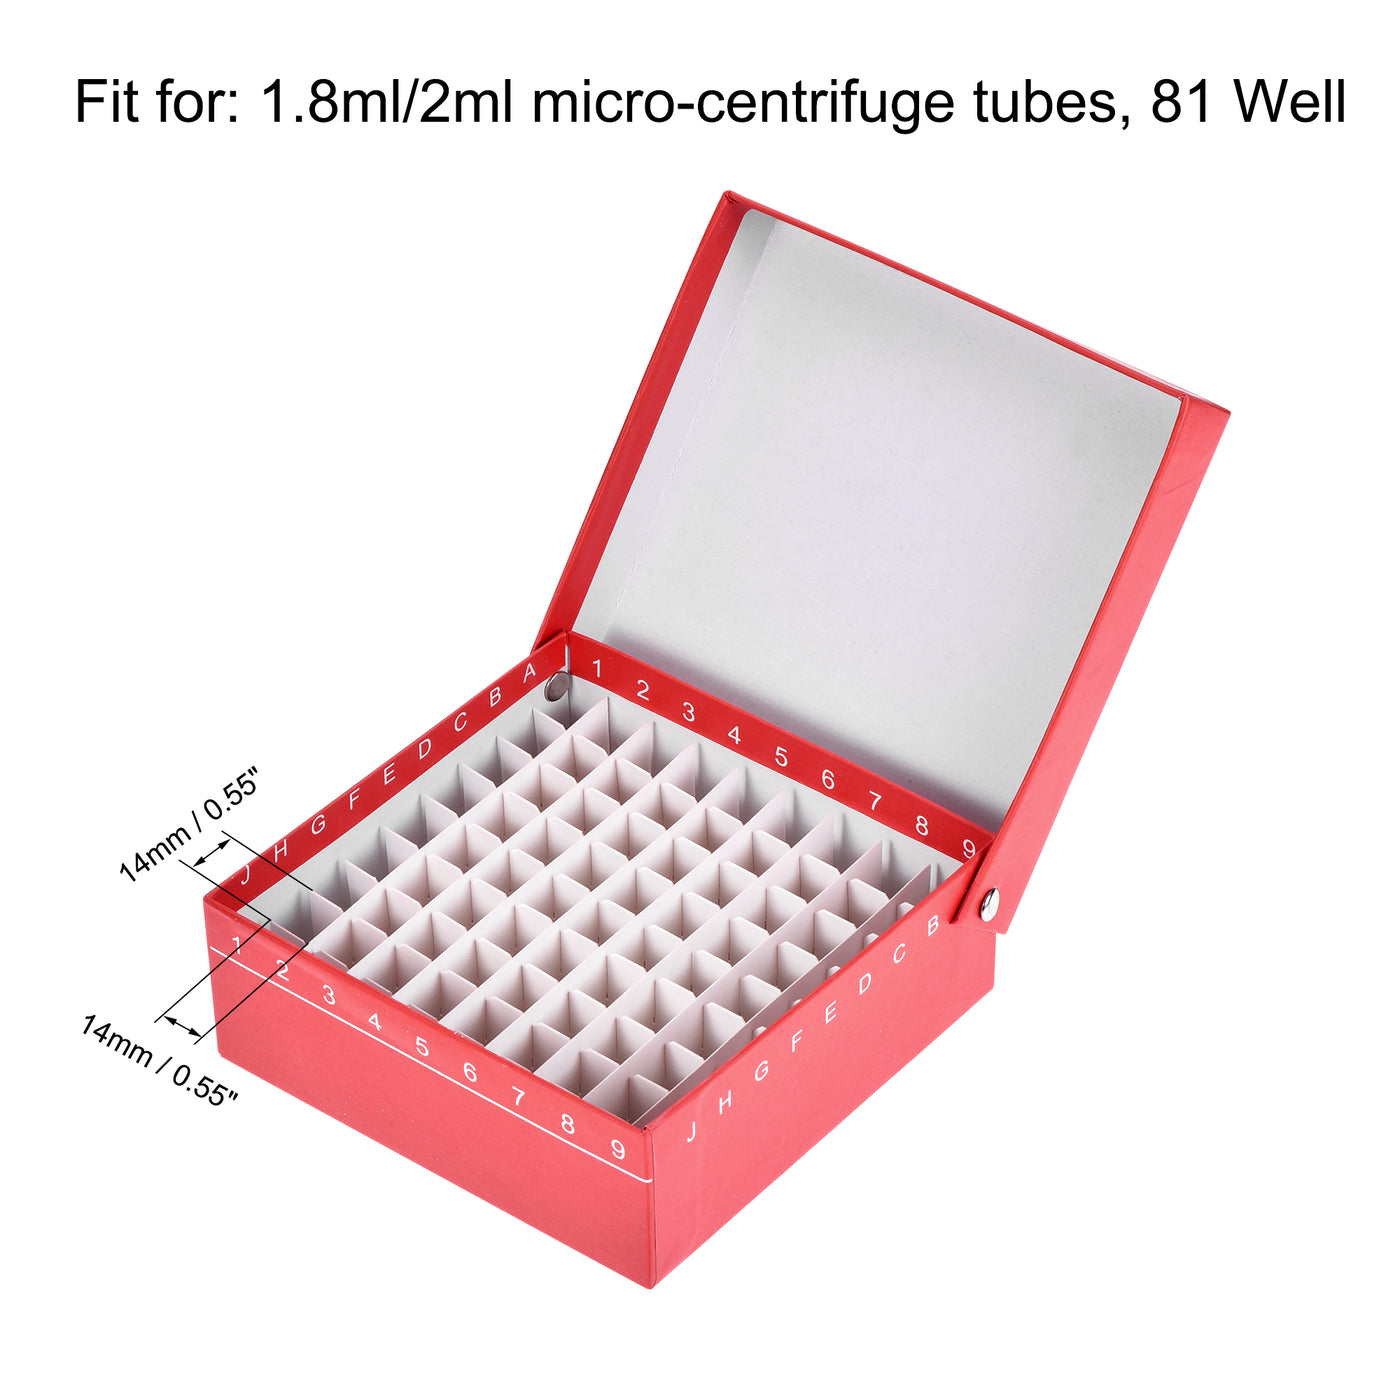 uxcell Uxcell Centrifuge Tube Holder 81-Well Waterproof Cardboard Red for 1.8ml/2ml Tubes